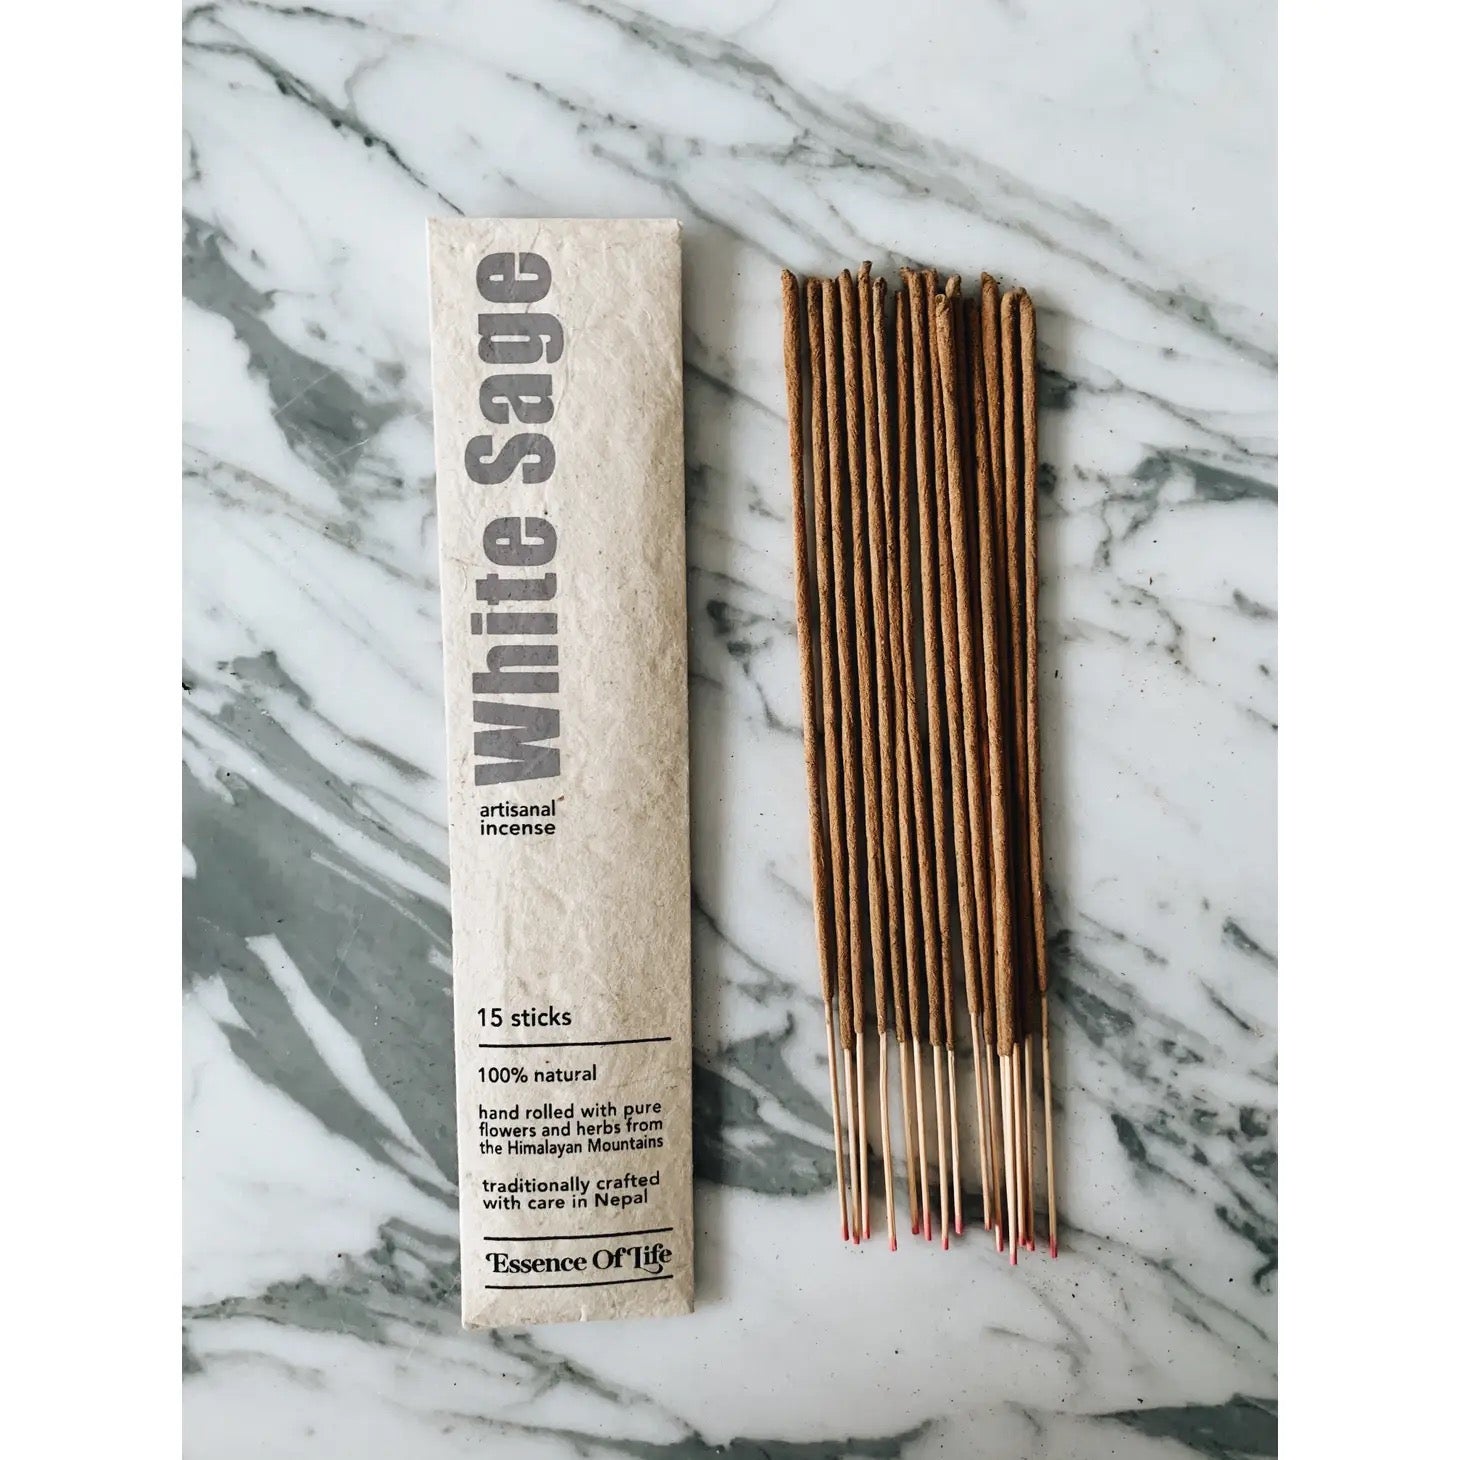 Essence of Life Organics - Handcrafted 100% Natural Artisanal incense, White Sage